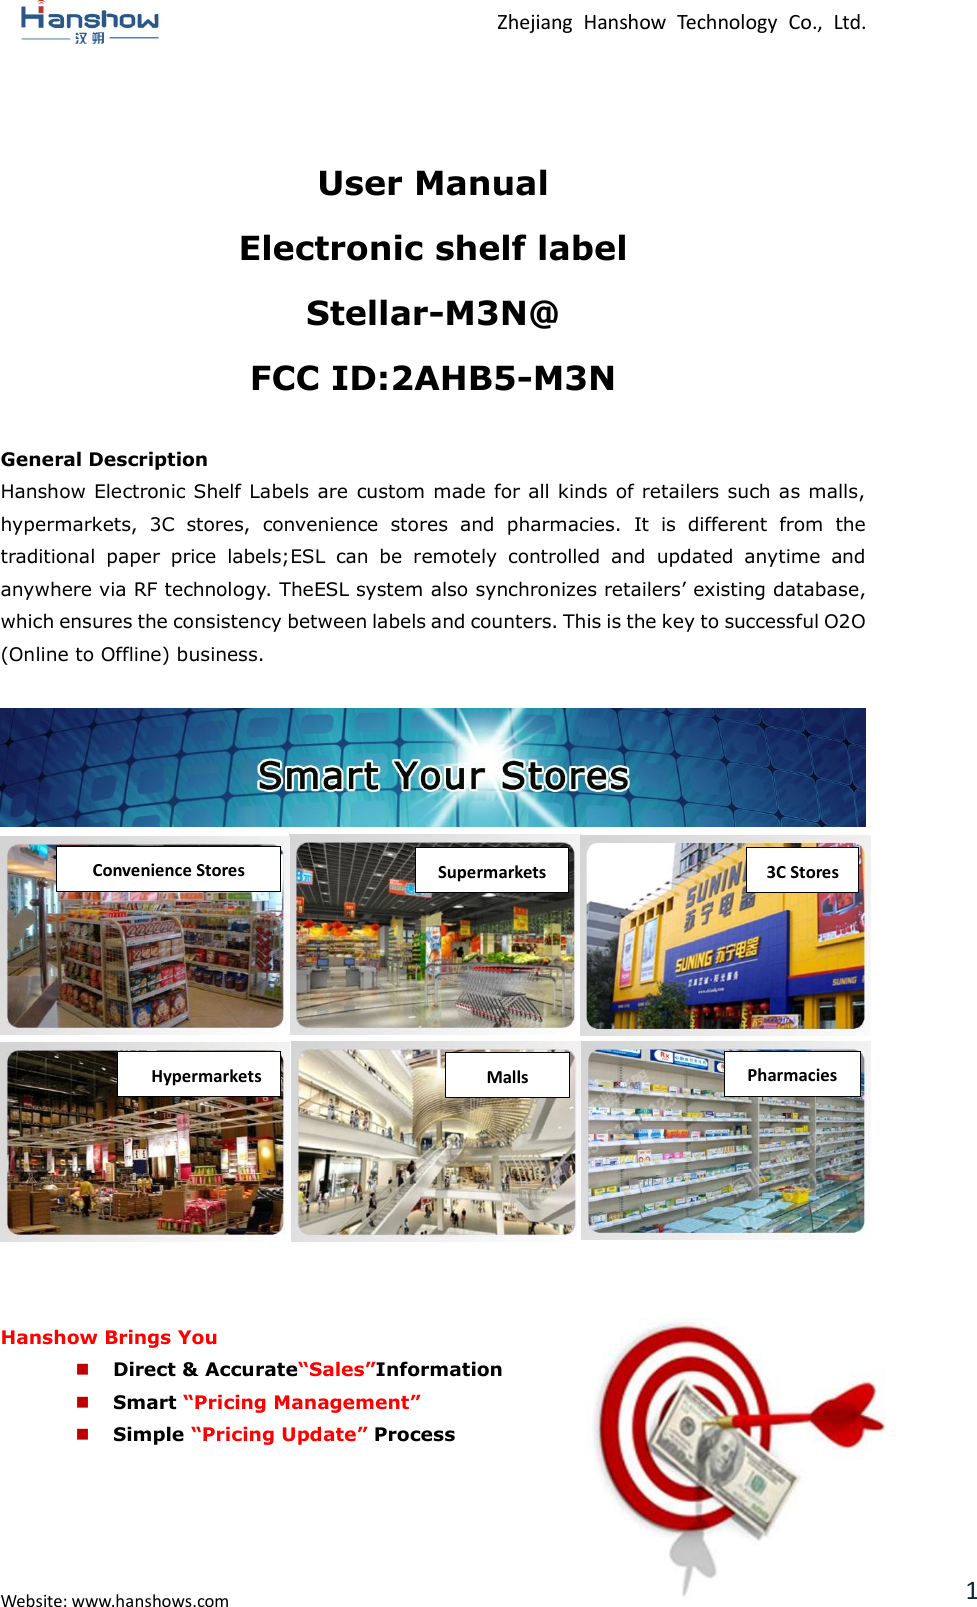  Zhejiang  Hanshow  Technology  Co.,  Ltd.   Website: www.hanshows.com 1  User Manual Electronic shelf label Stellar-M3N@ FCC ID:2AHB5-M3N  General Description Hanshow Electronic Shelf Labels  are custom made for all kinds of retailers such as malls, hypermarkets,  3C  stores,  convenience  stores  and  pharmacies.  It  is  different  from  the traditional  paper  price  labels;ESL  can  be  remotely  controlled  and  updated  anytime  and anywhere via RF technology. TheESL system also synchronizes retailers’ existing database, which ensures the consistency between labels and counters. This is the key to successful O2O (Online to Offline) business.                    Hanshow Brings You  Direct &amp; Accurate“Sales”Information  Smart “Pricing Management”  Simple “Pricing Update” Process    Convenience Stores Supermarkets 3C Stores Pharmacies Malls Hypermarkets G-MALL 